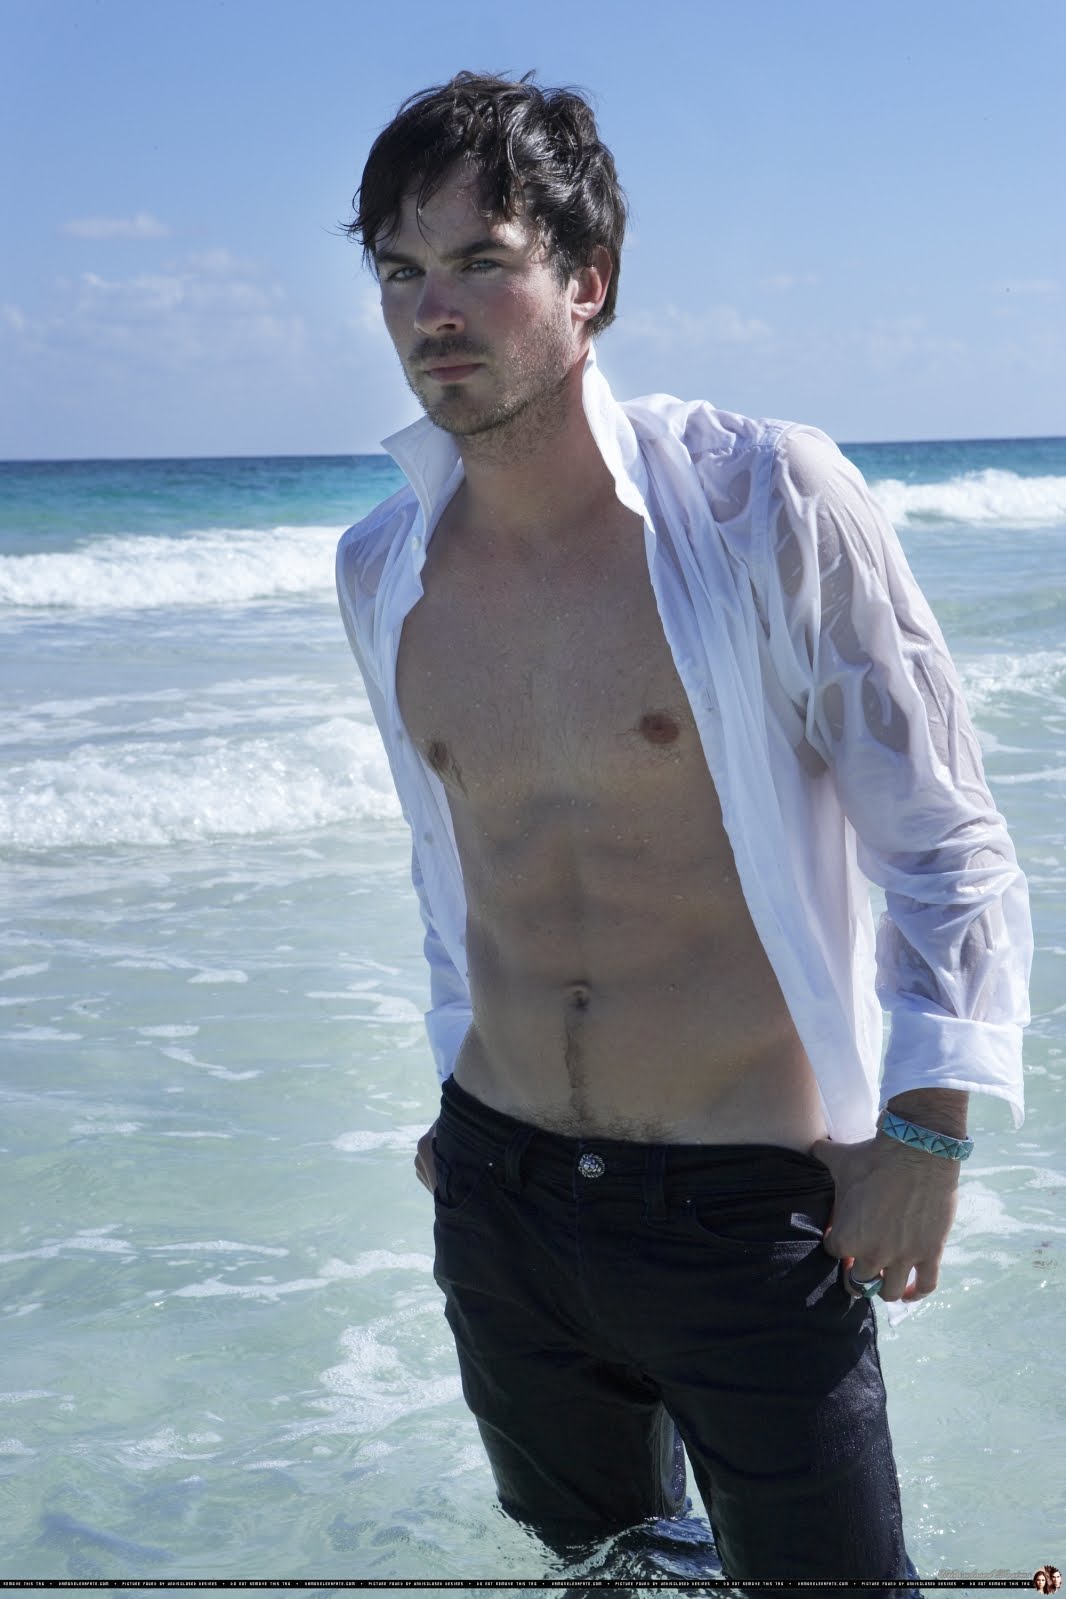 Obsessed with Hollywood: Ian Somerhalder's New Photoshoot on the beach!1066 x 1599